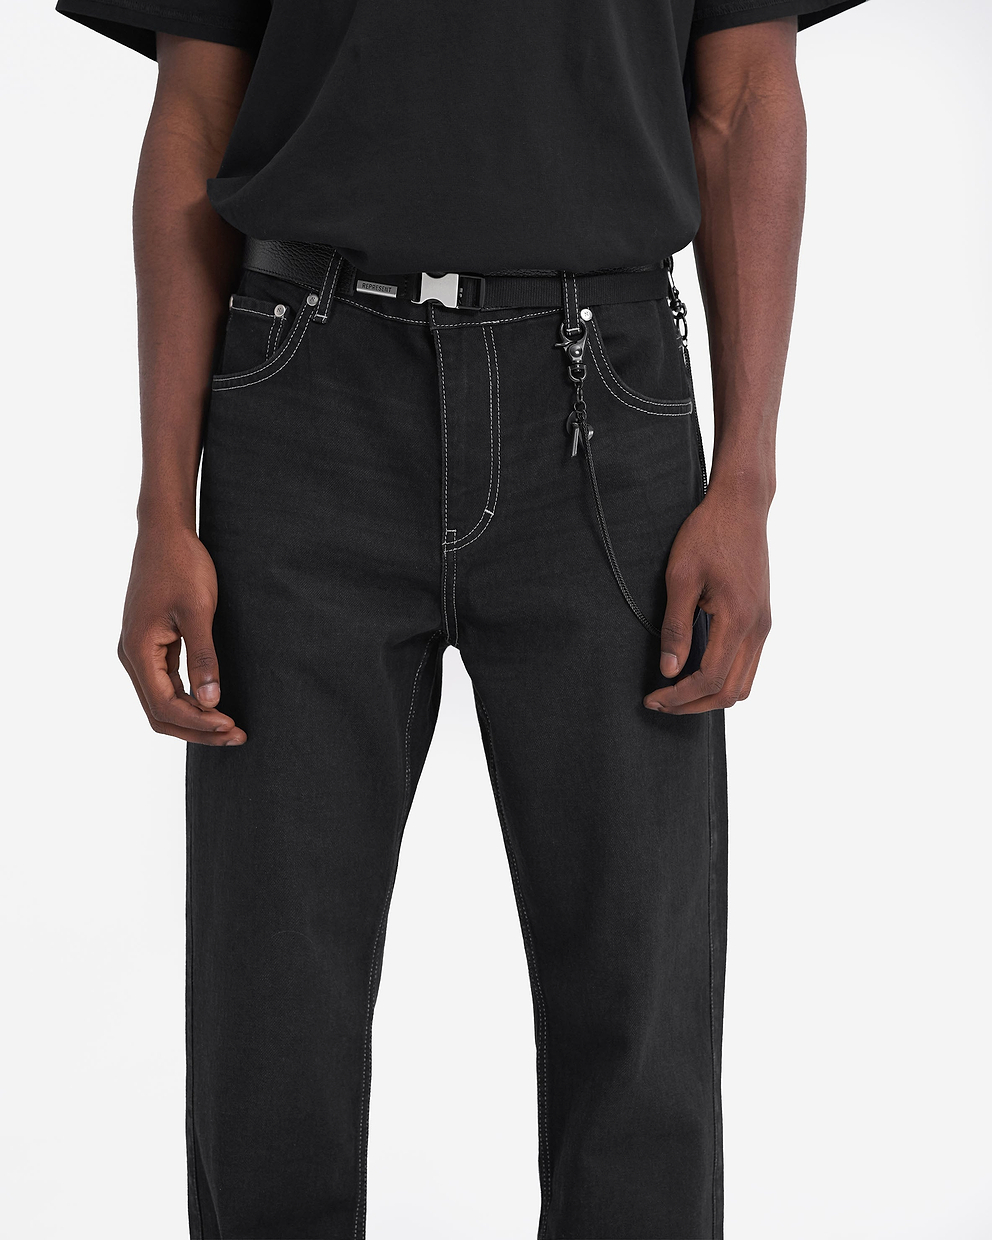 Represent Clo - The Split Pant - A mid weight textured